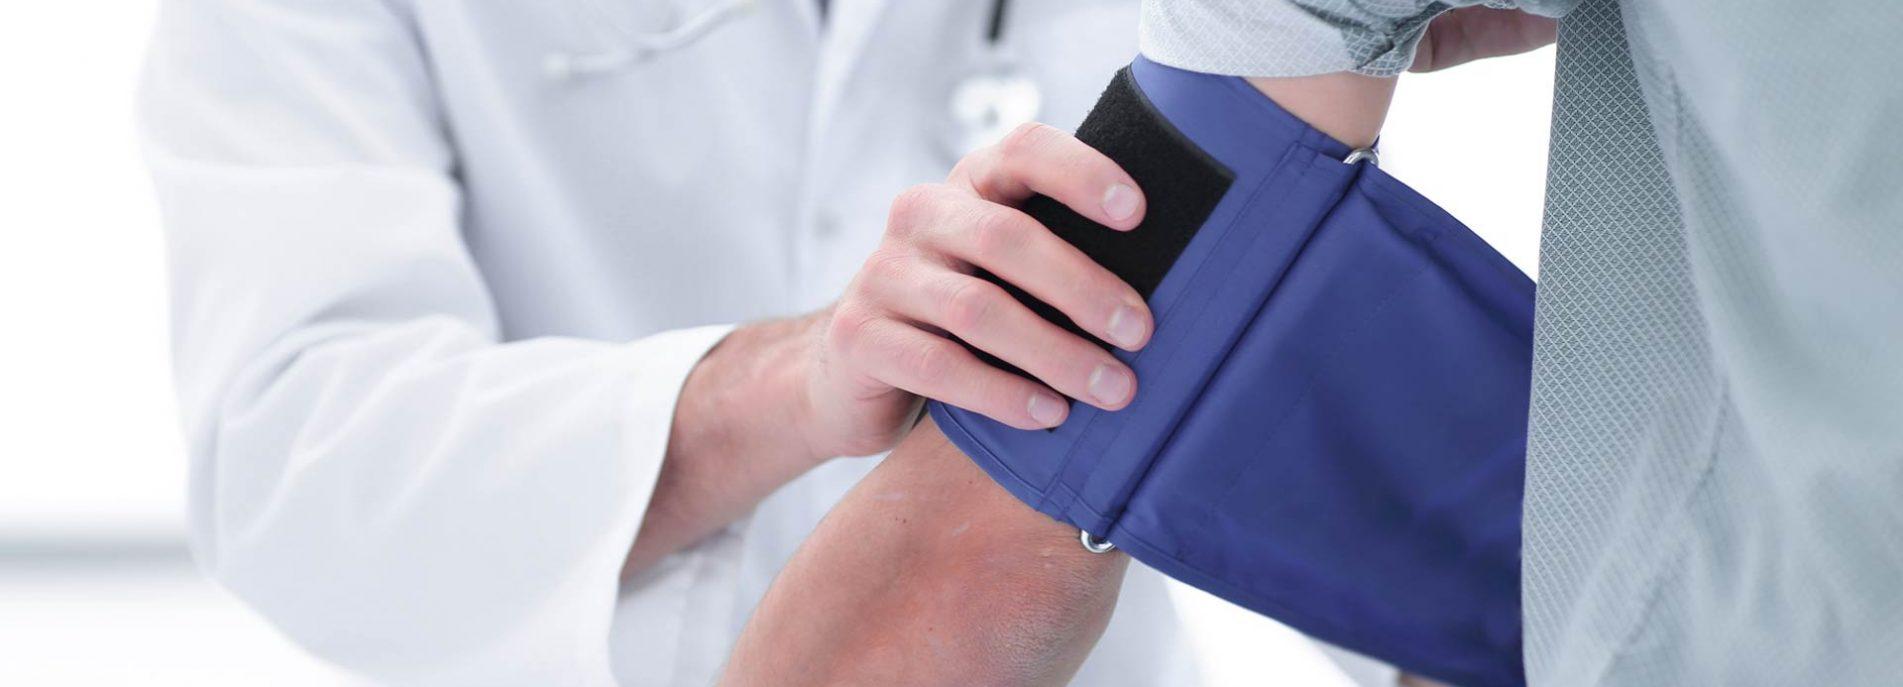 Systemic Hypertension: Know About the Causes, Risks, and Treatment